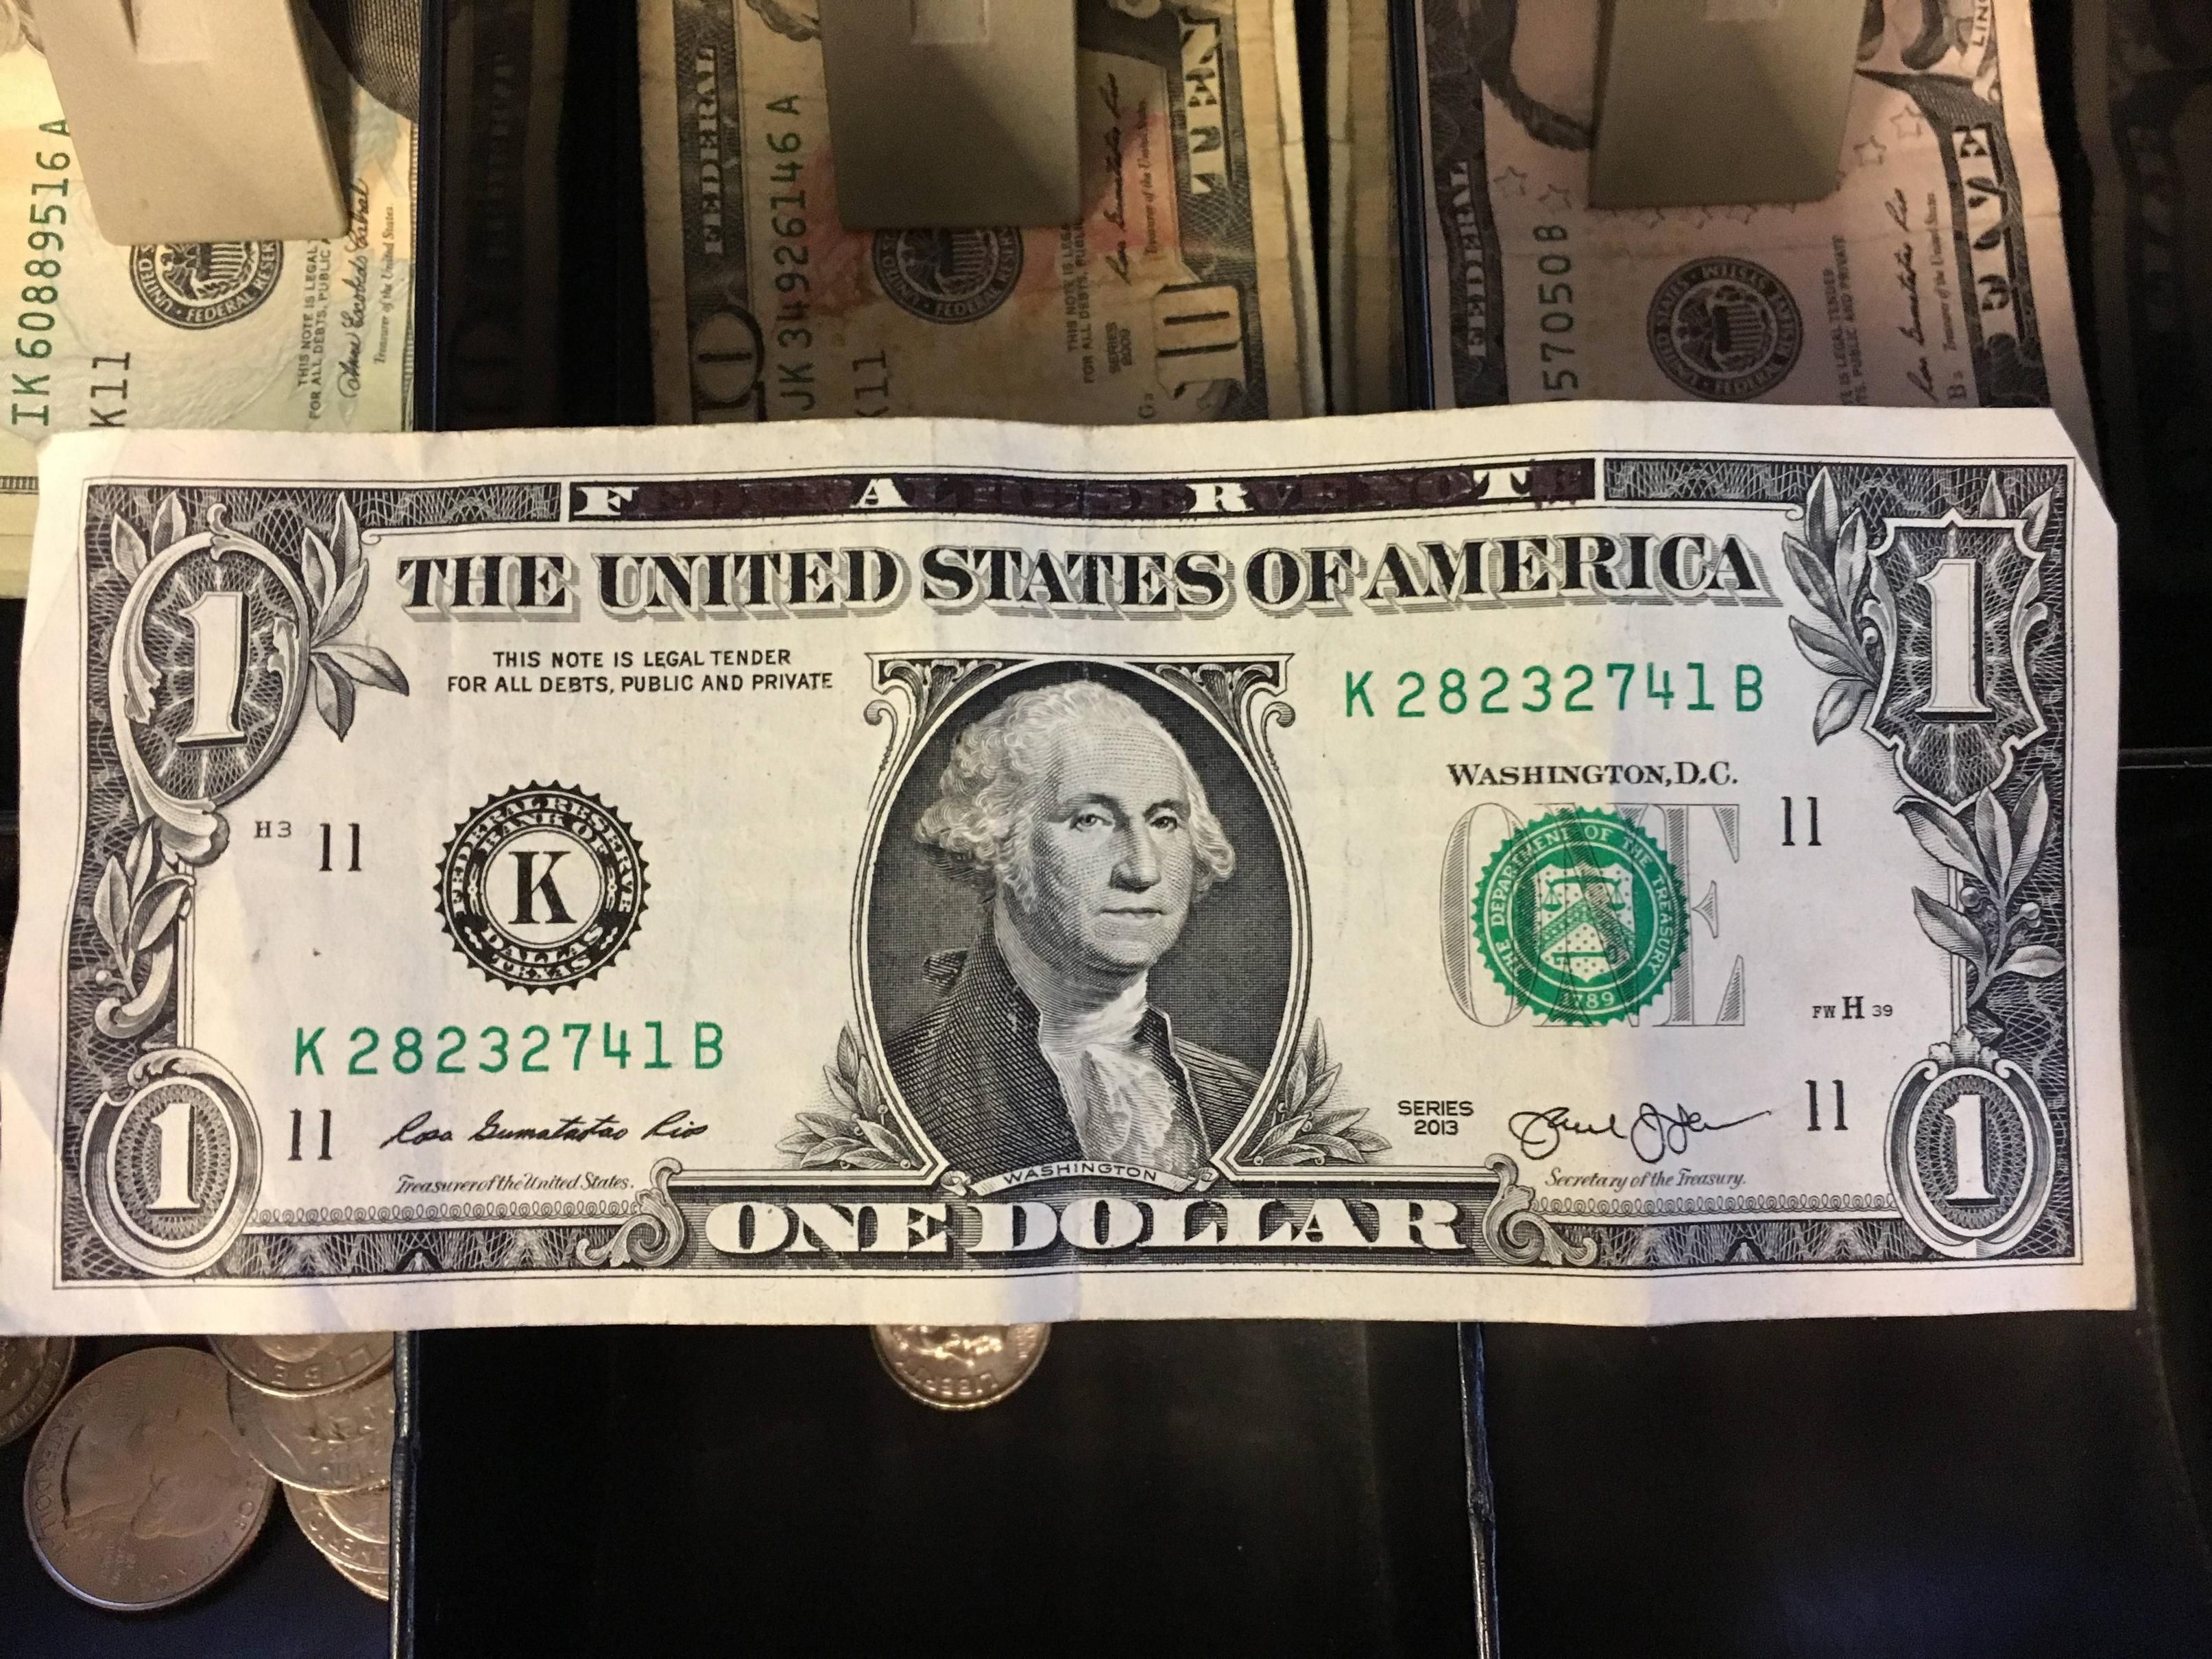 A customer paid with this today.